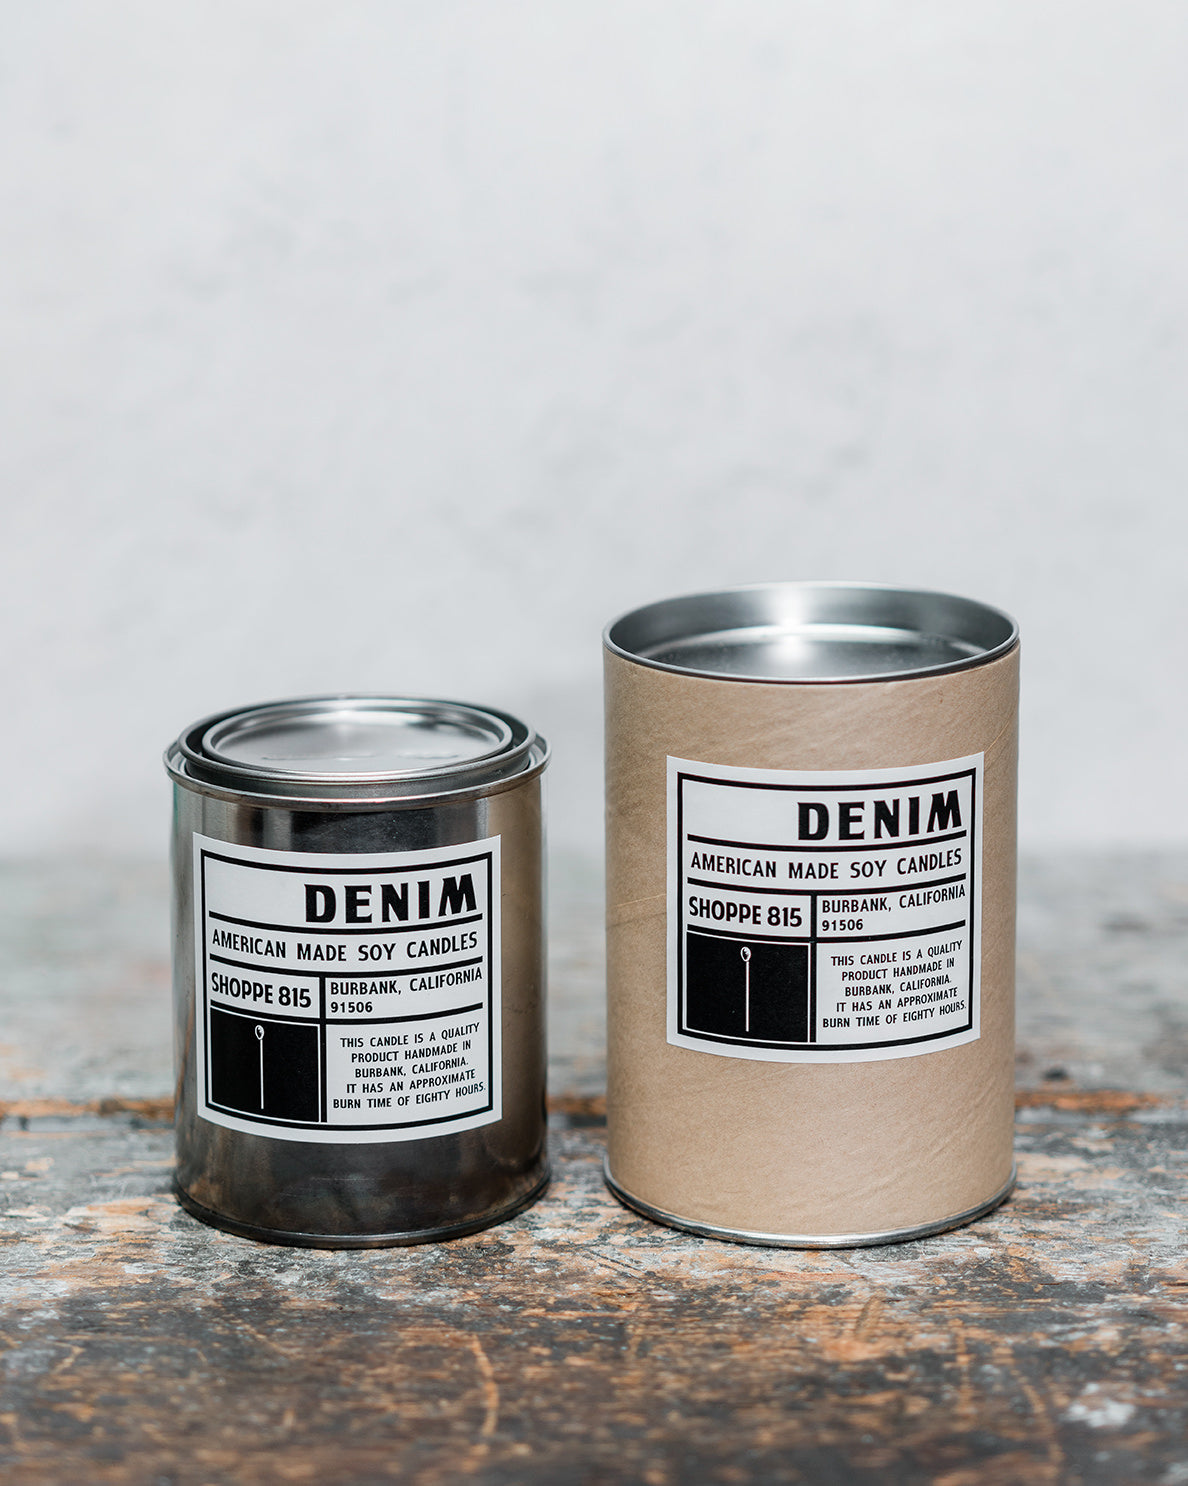 Denim gender neutral tin candle on wooden shelf with packaging